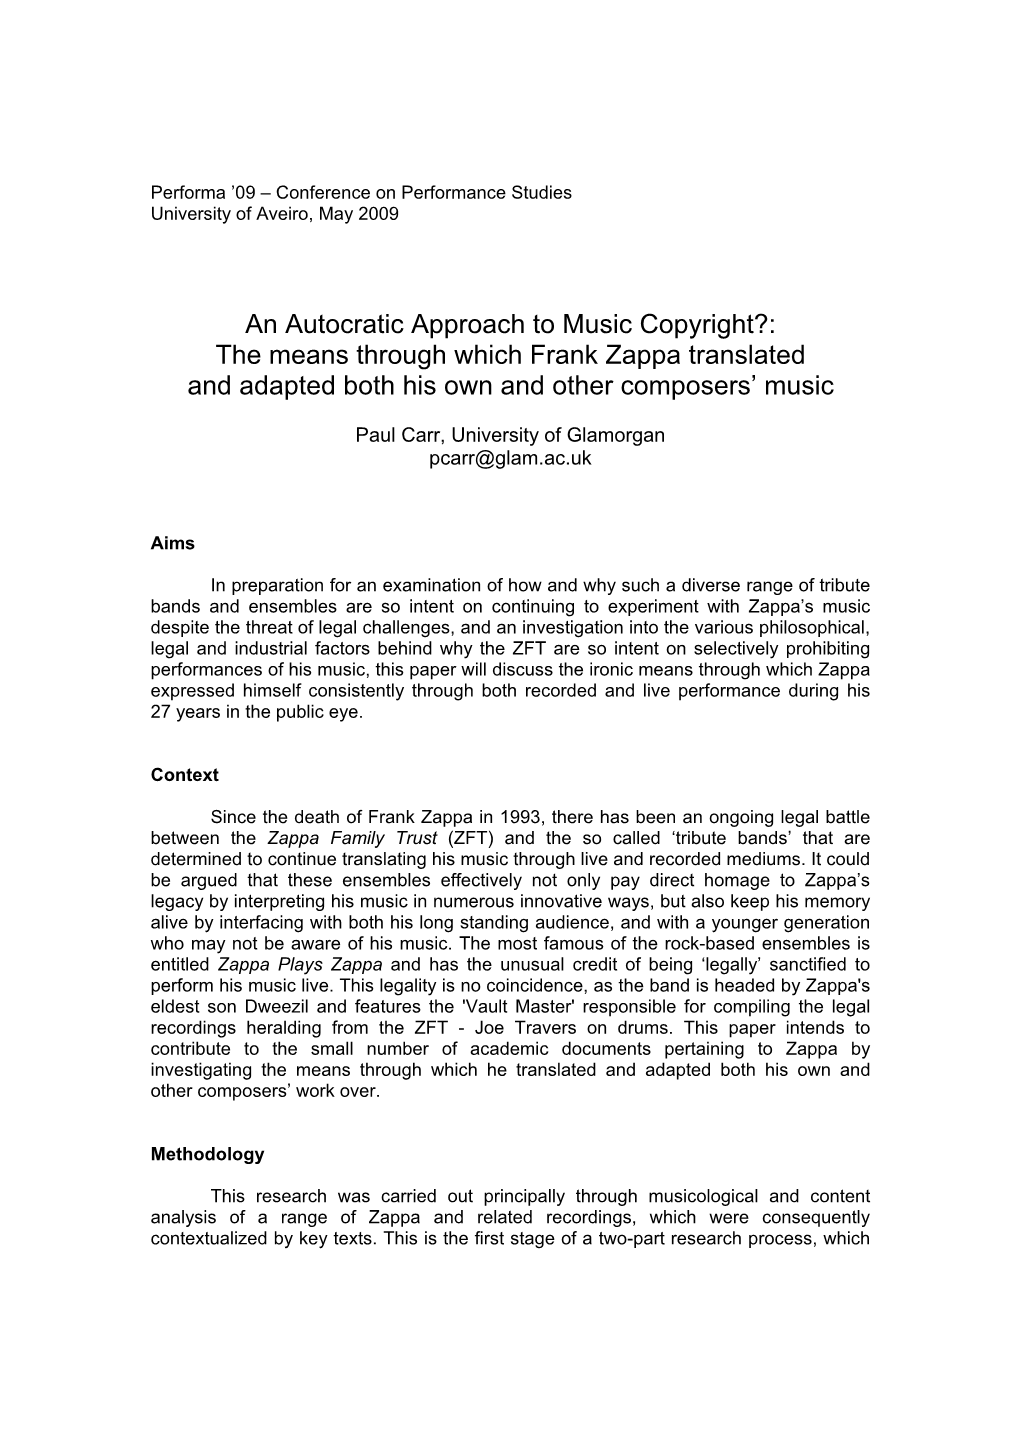 An Autocratic Approach to Music Copyright?: the Means Through Which Frank Zappa Translated and Adapted Both His Own and Other Composers’ Music